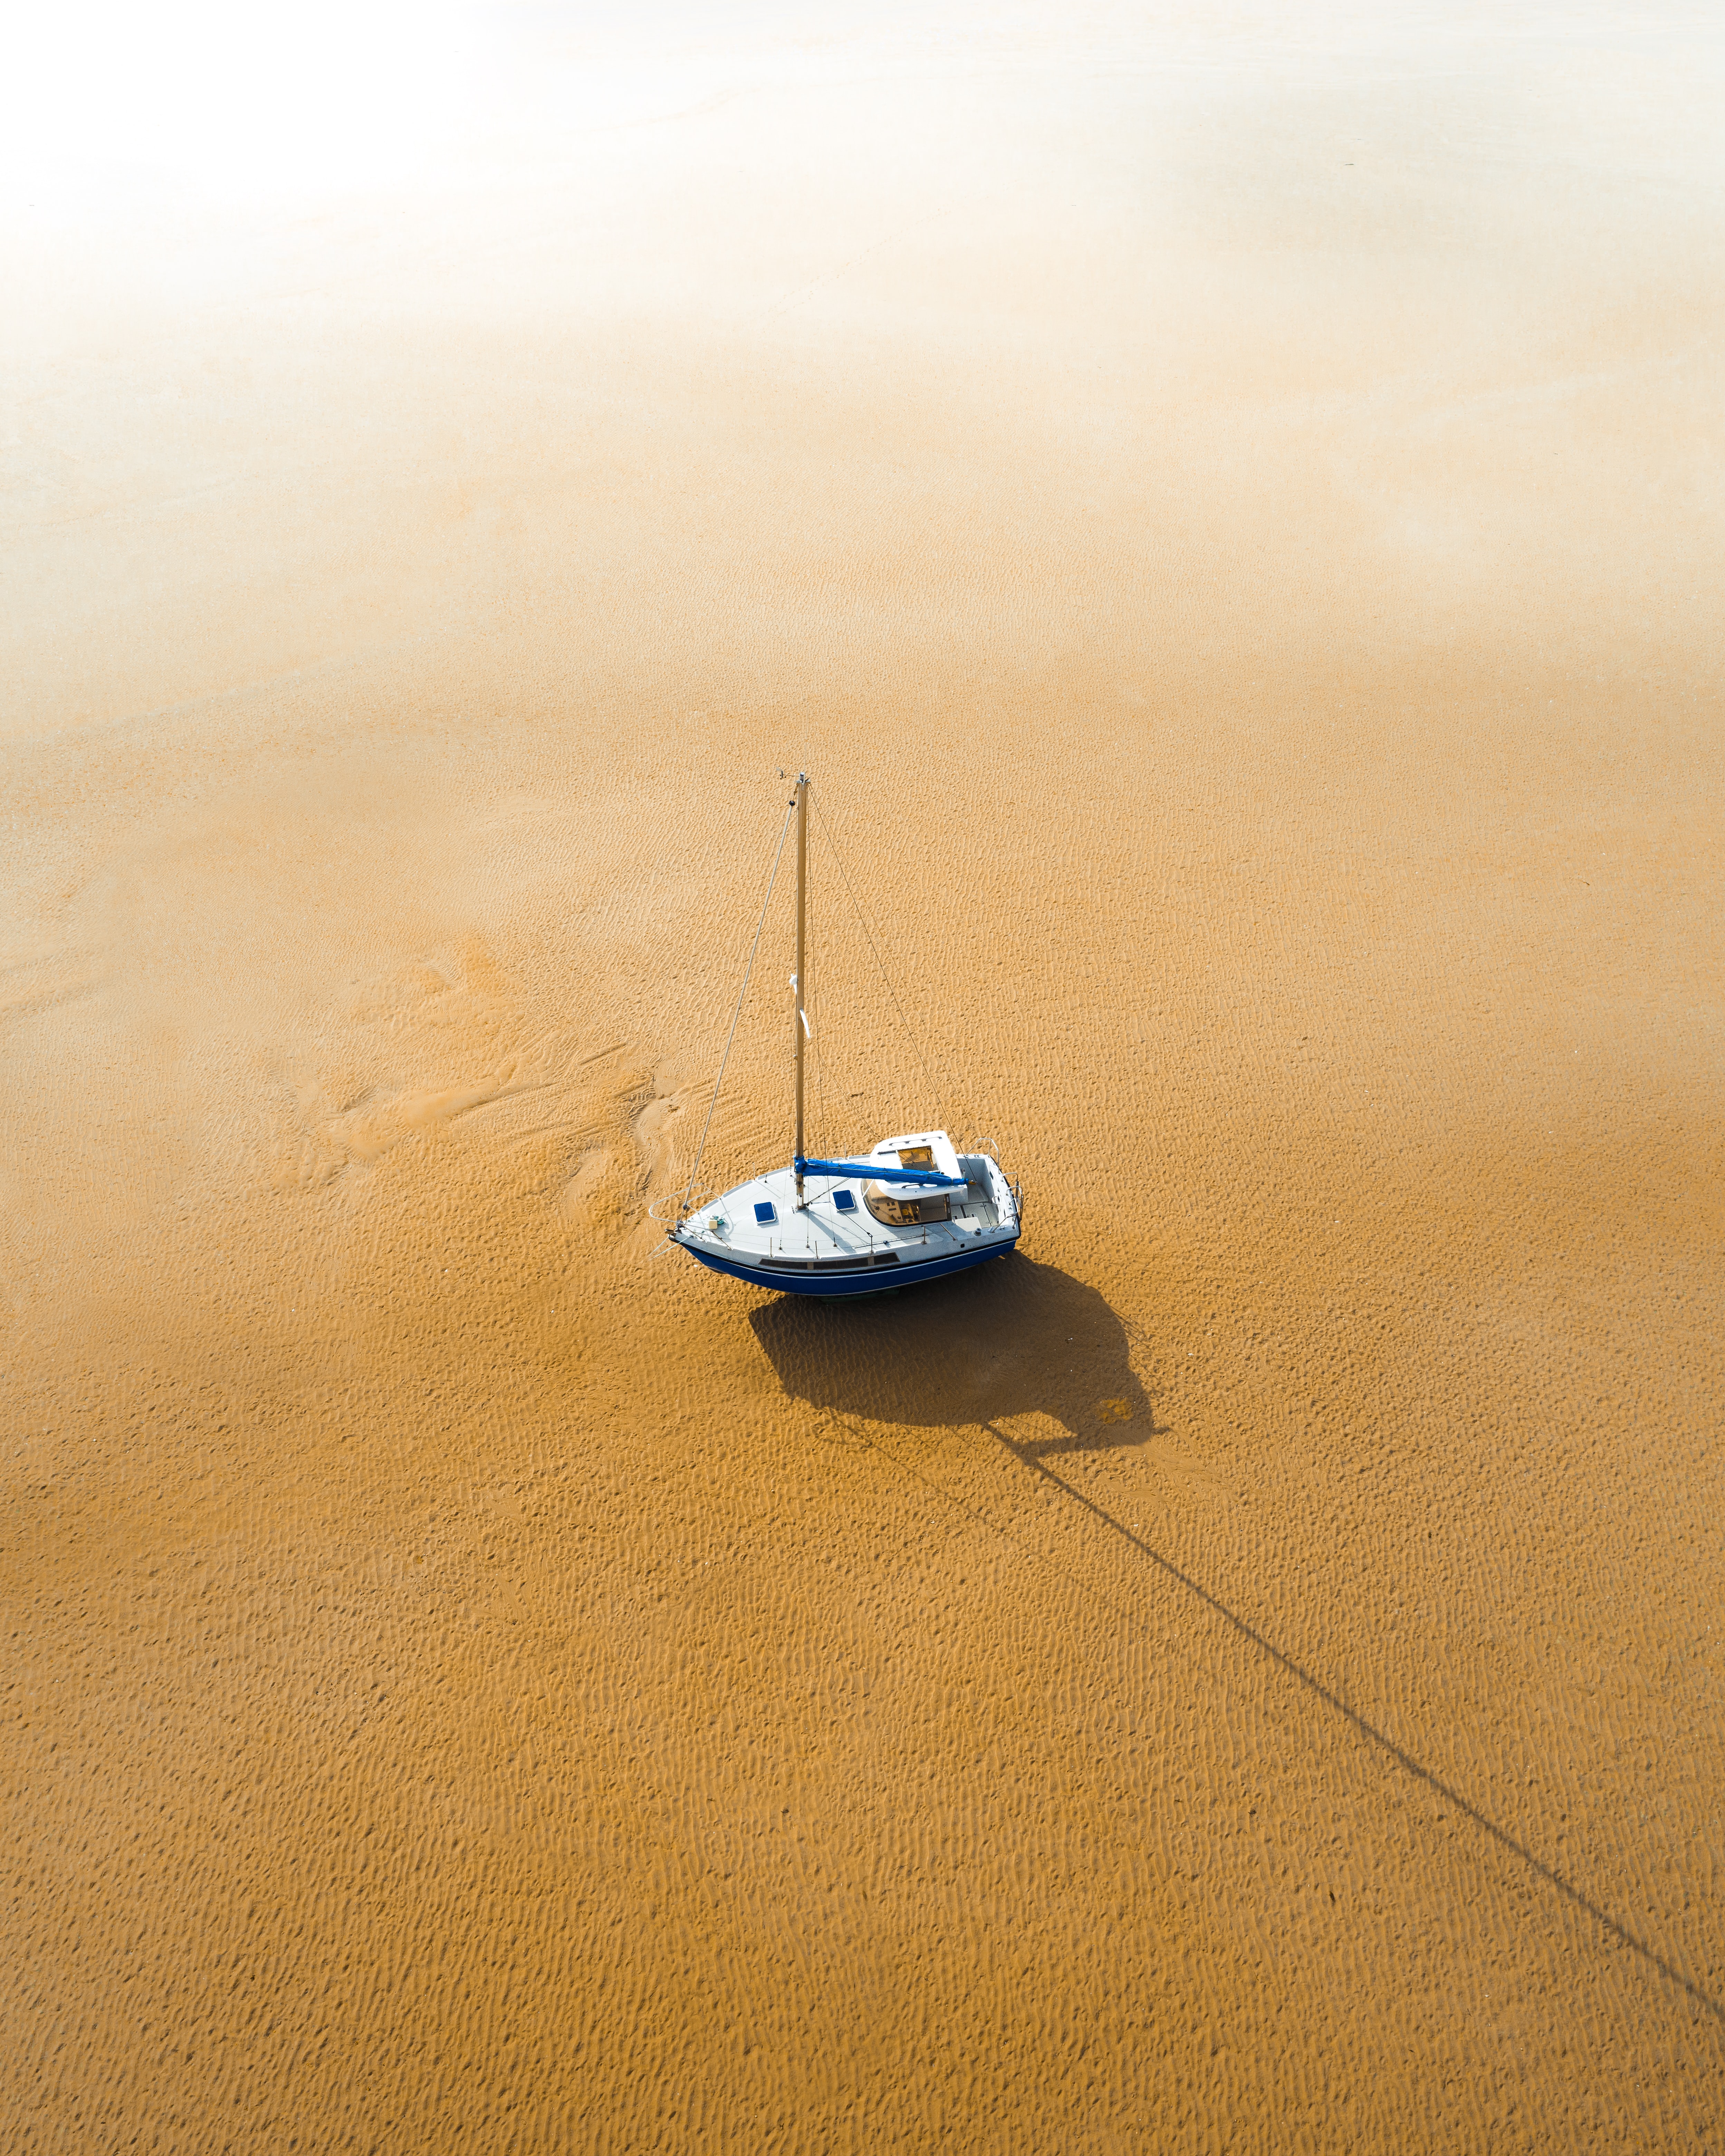 sailboat, sand, view from above, miscellanea, miscellaneous, boat, sailfish